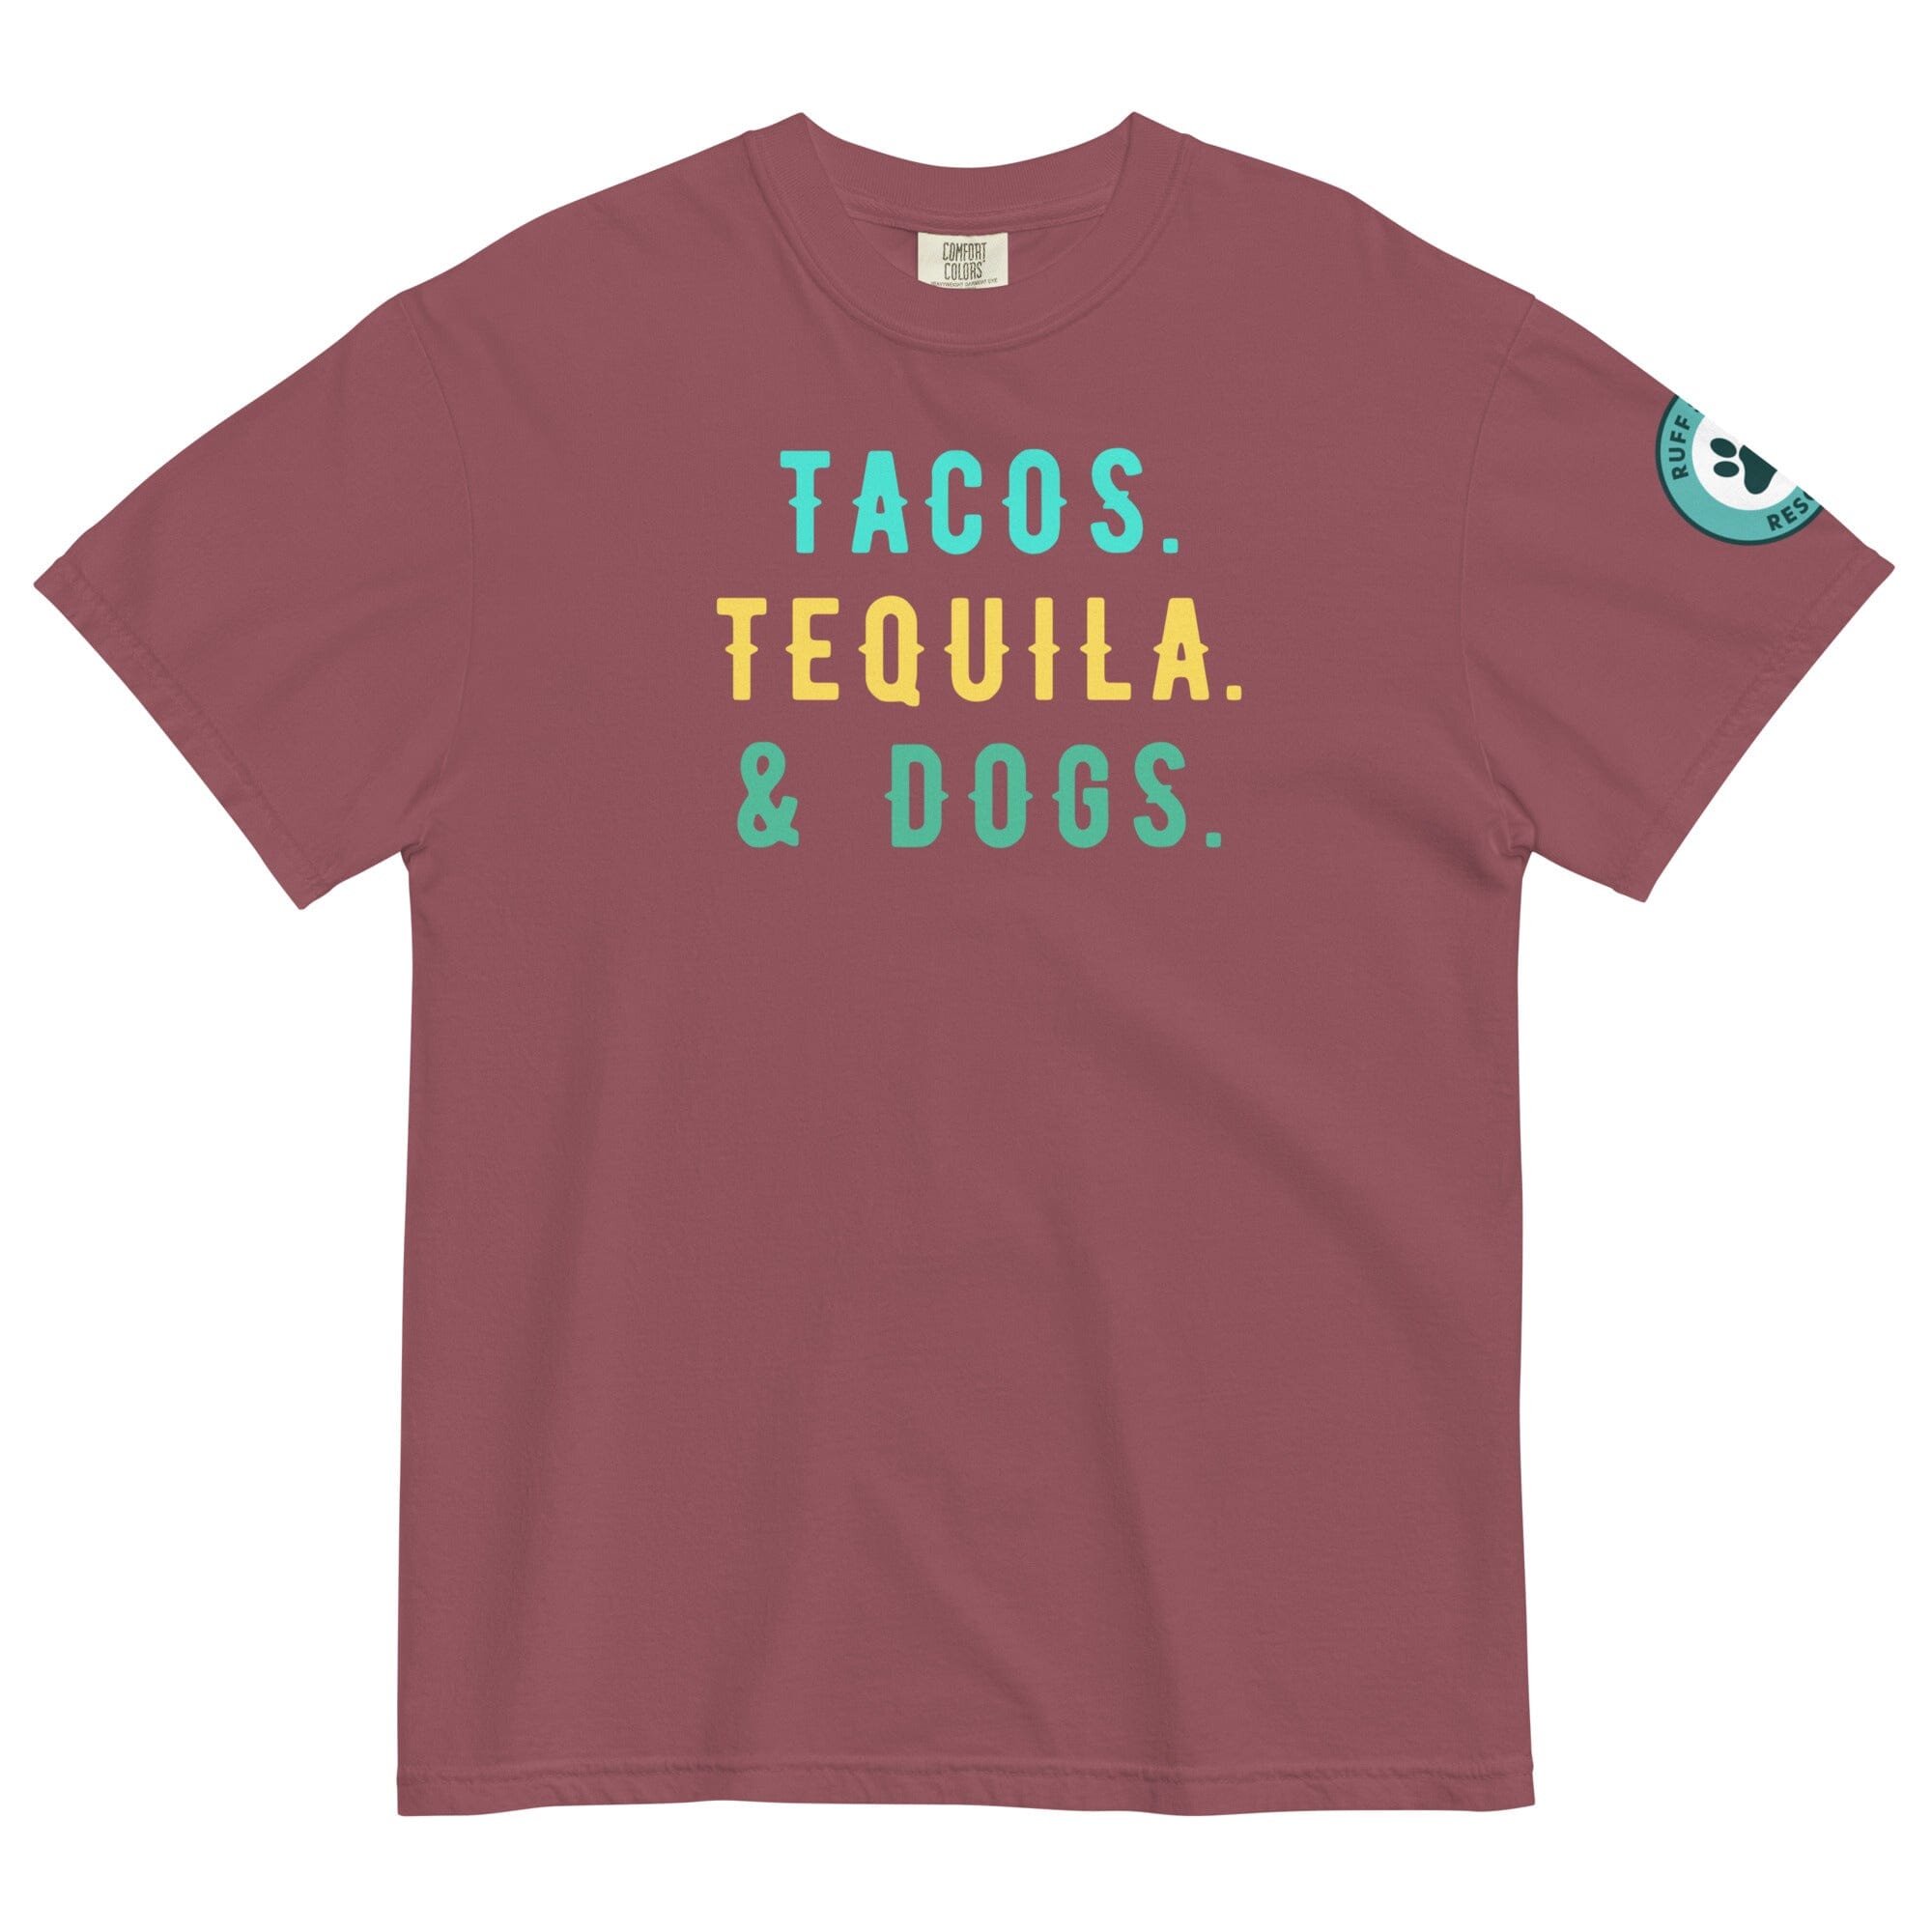 DOGS & TEQUILA RSR UNI T